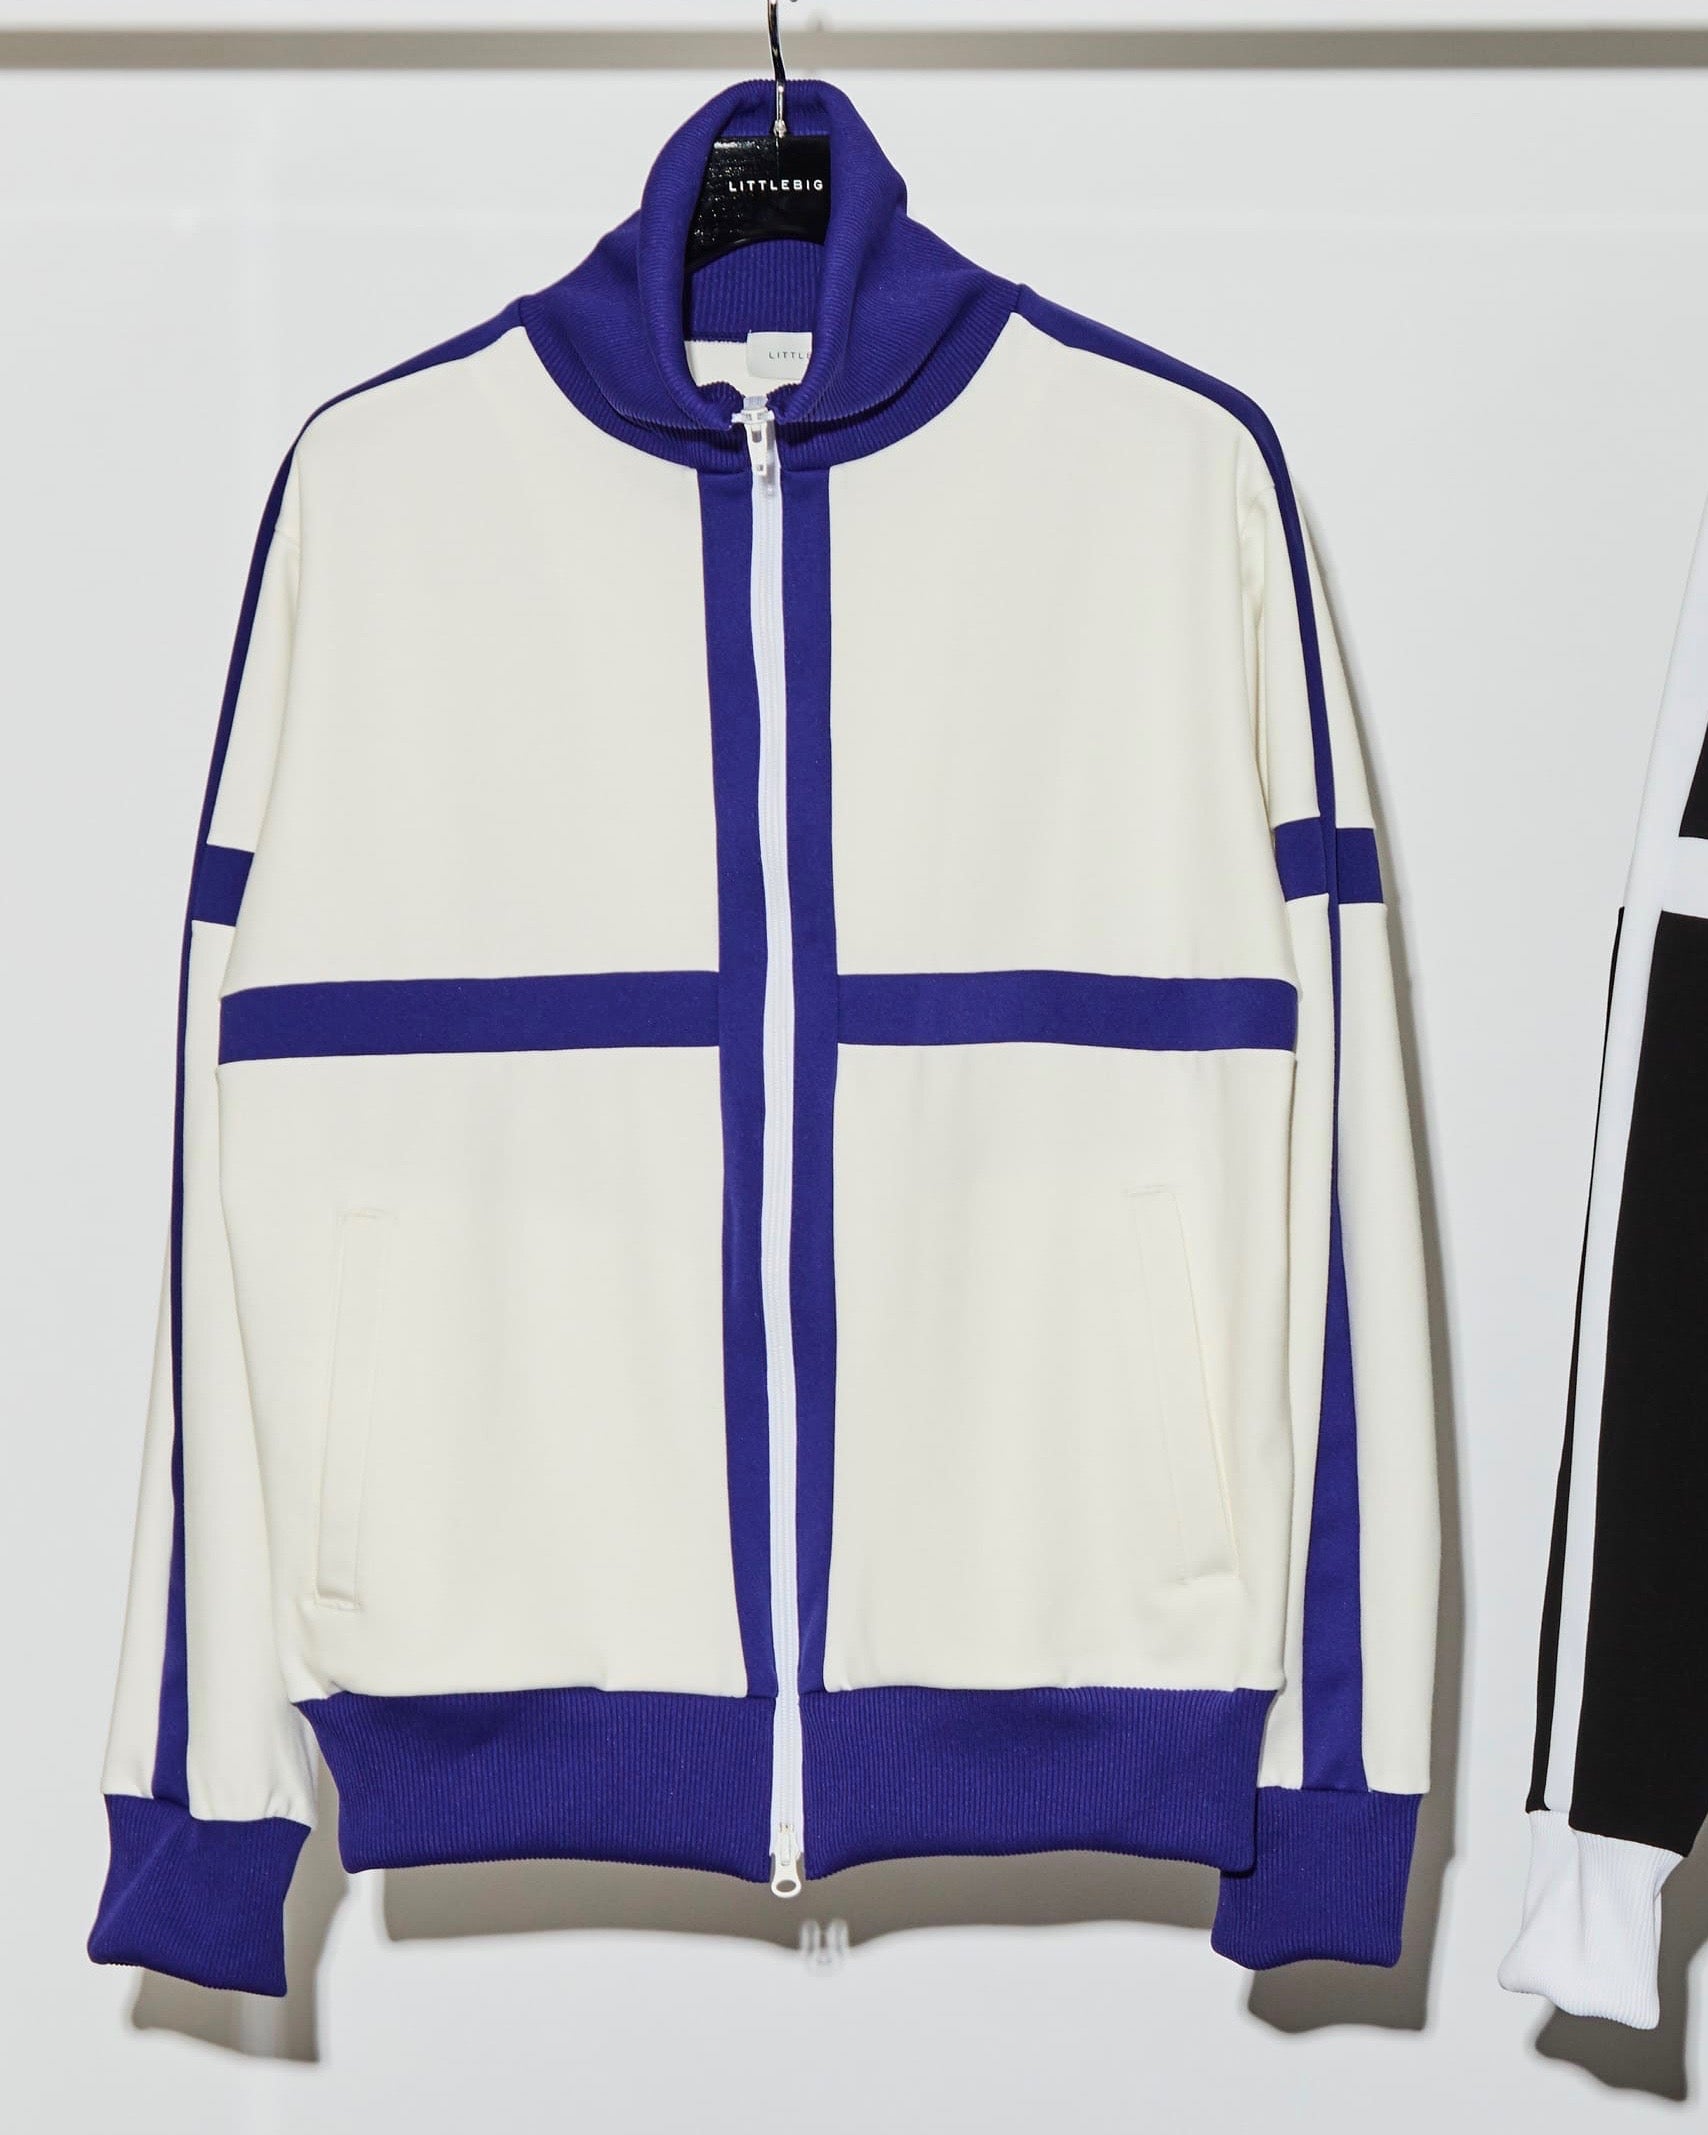 LITTLEBIG(リトルビッグ)のTrack Top WHITE or BLACKの通販｜PALETTE ...